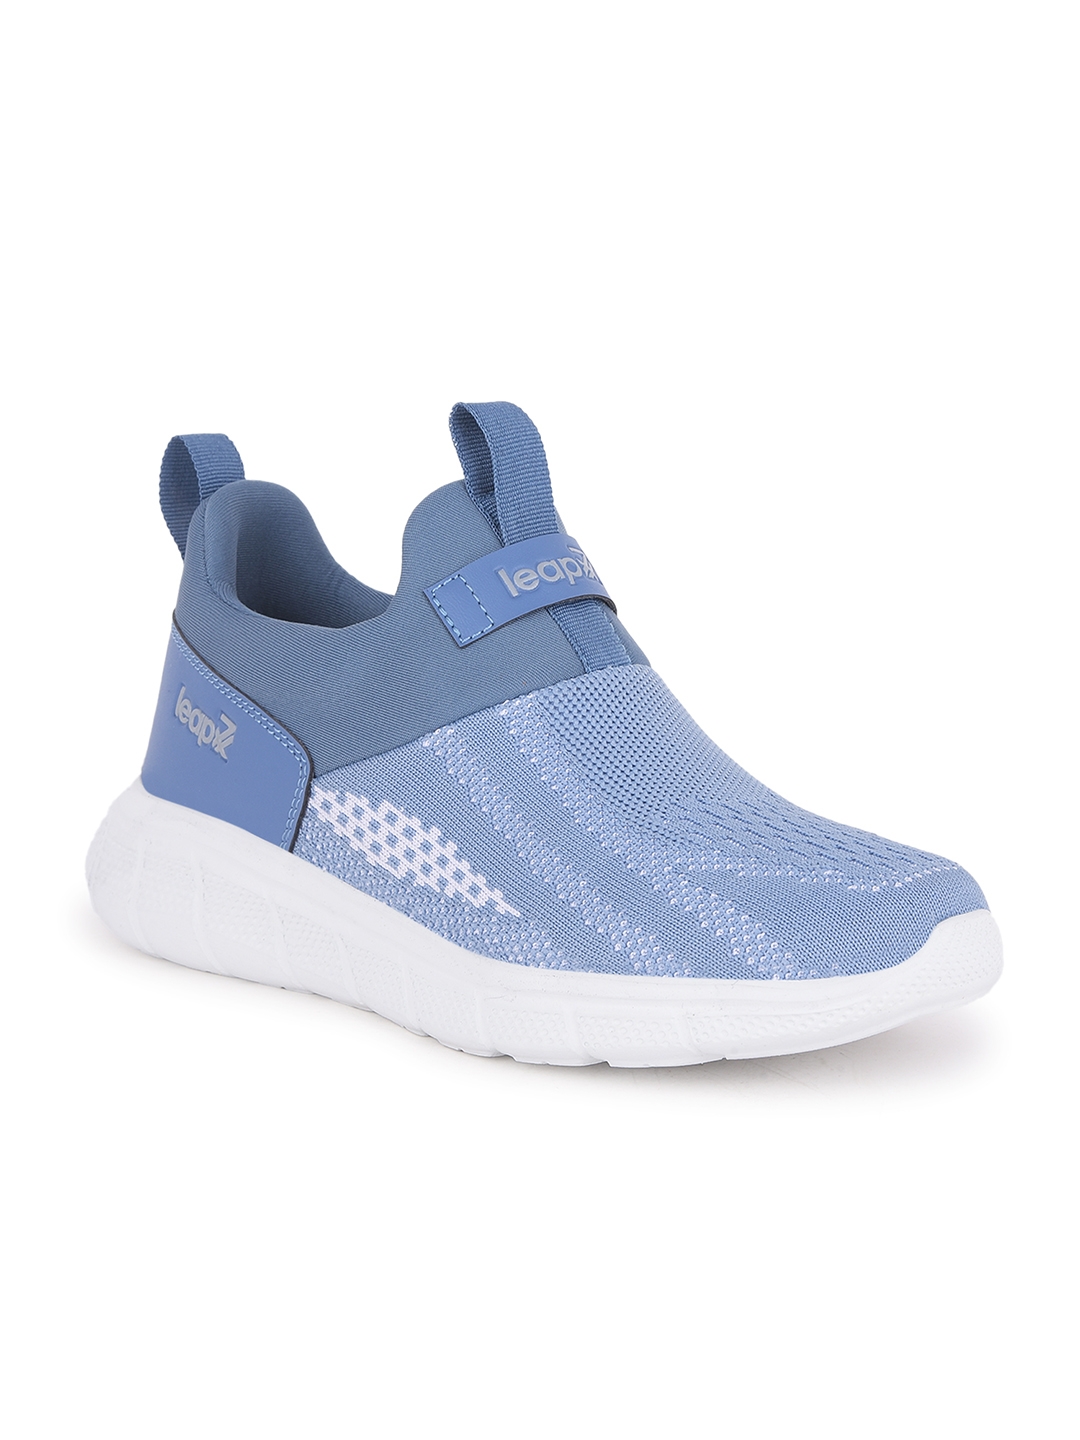 Liberty | Women's LEAP7X Blue Solid Casual Slip on Shoes